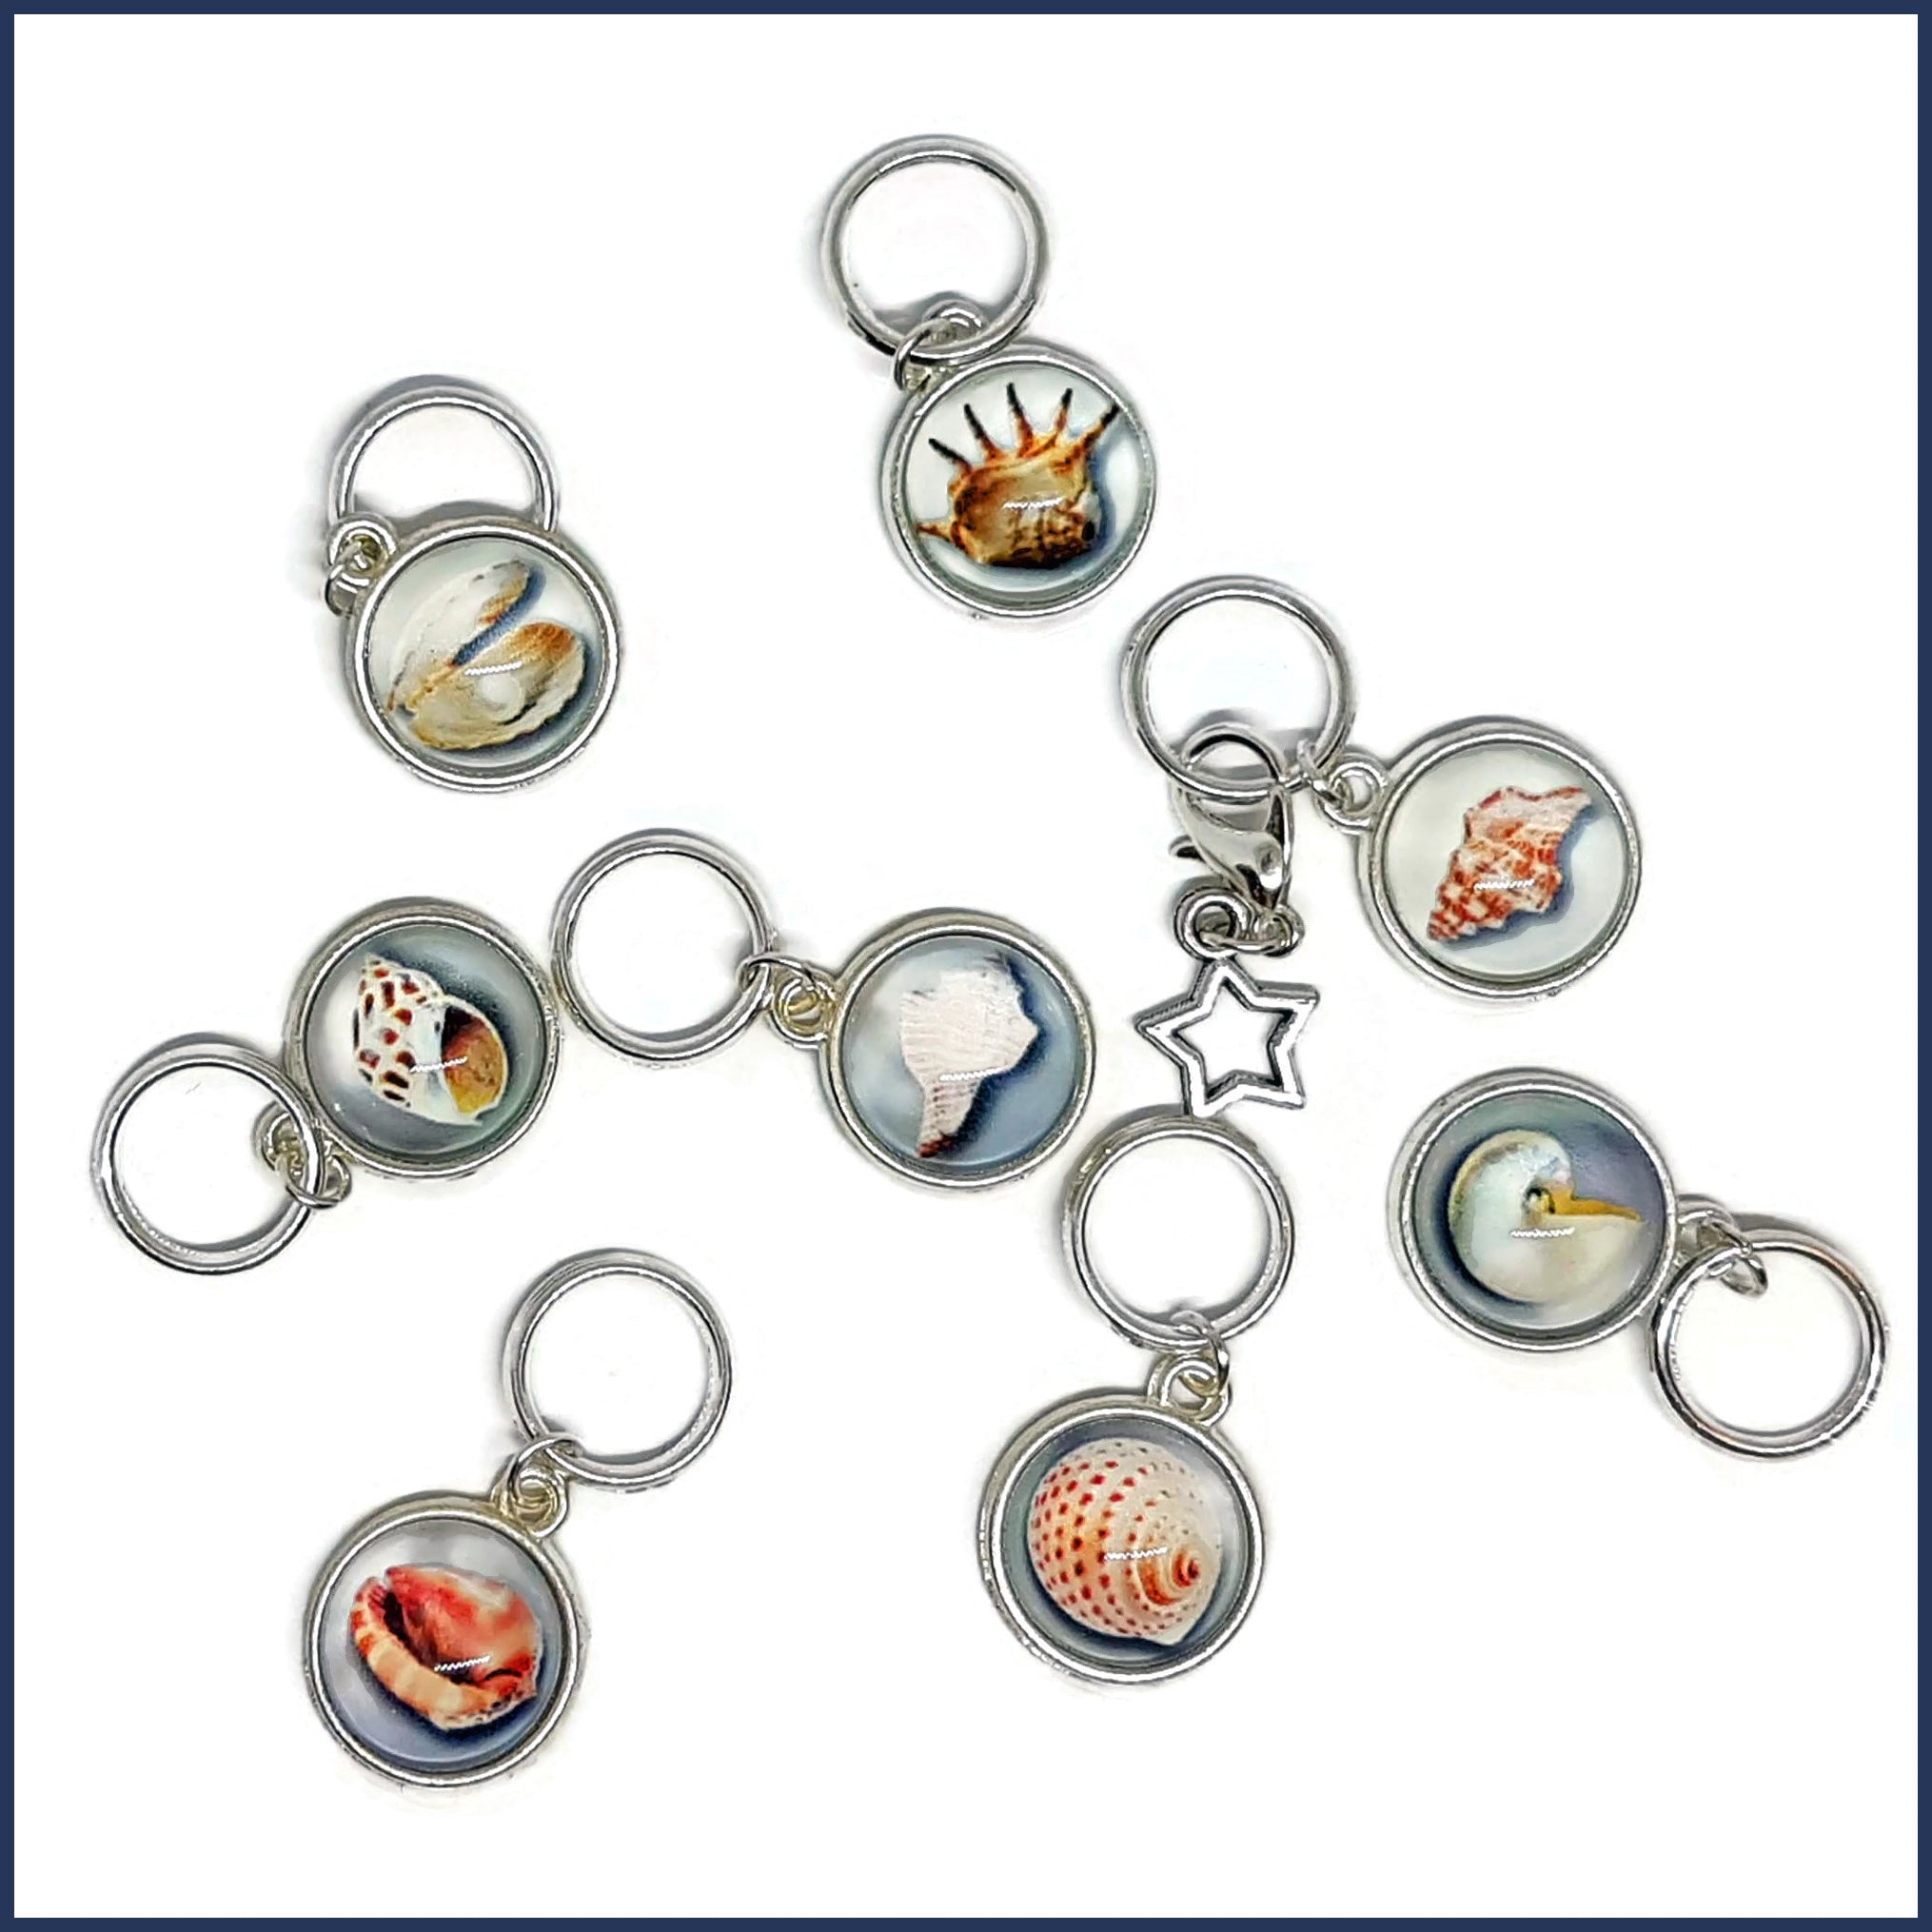 Beachcomber Stitch Markers Sets - each set includes 6 makers made